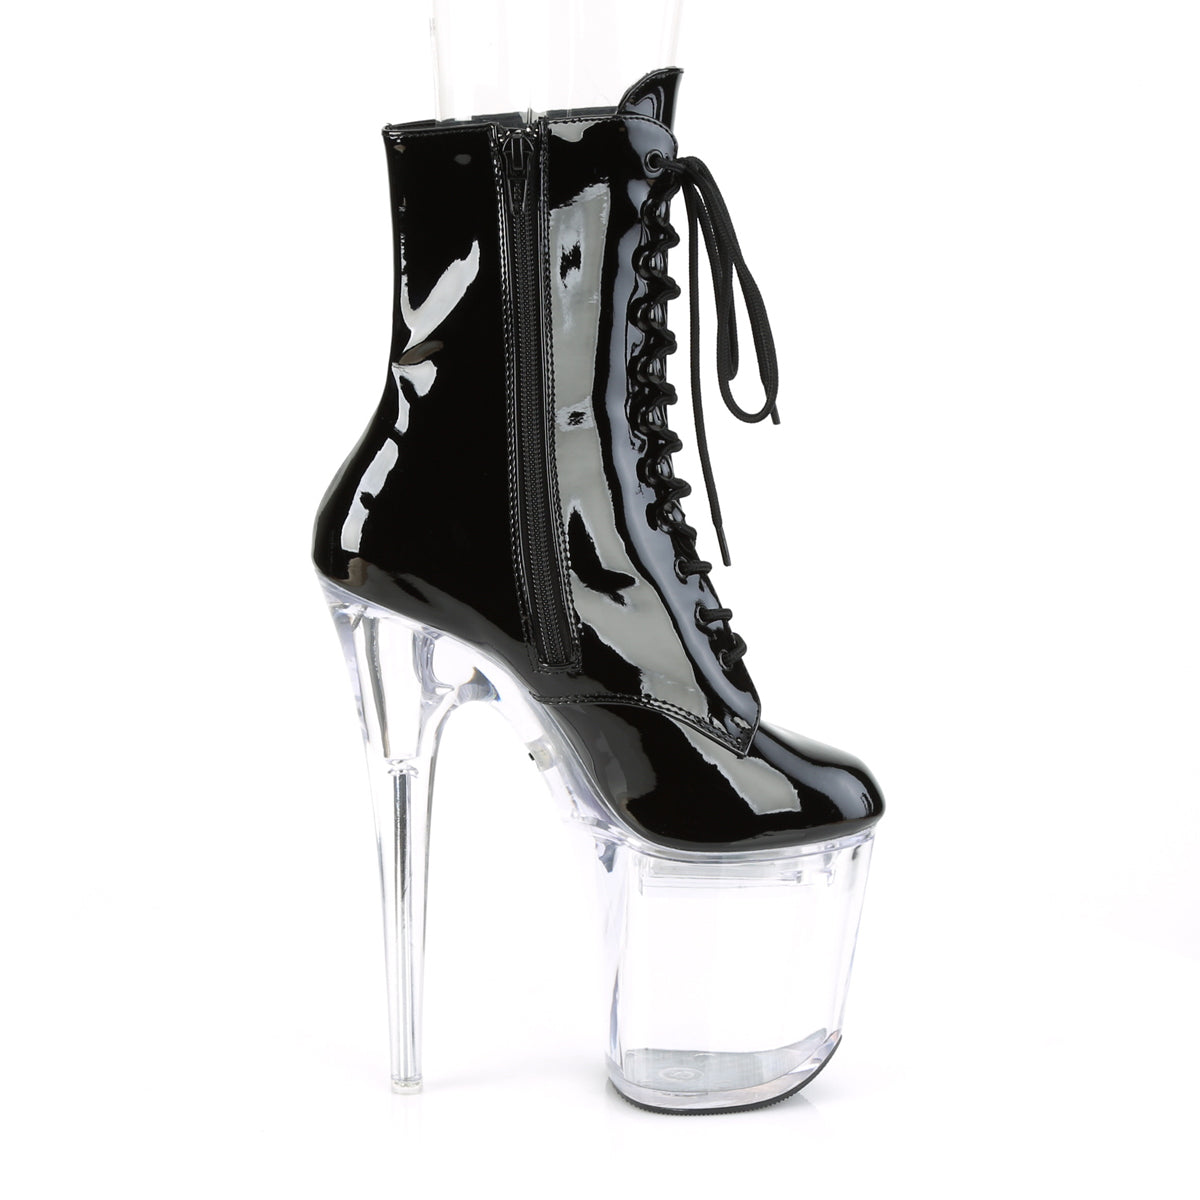 FLASHDANCE-1020-8 Pleaser Black Patent/Clear Platform Shoes [Kinky Boots]